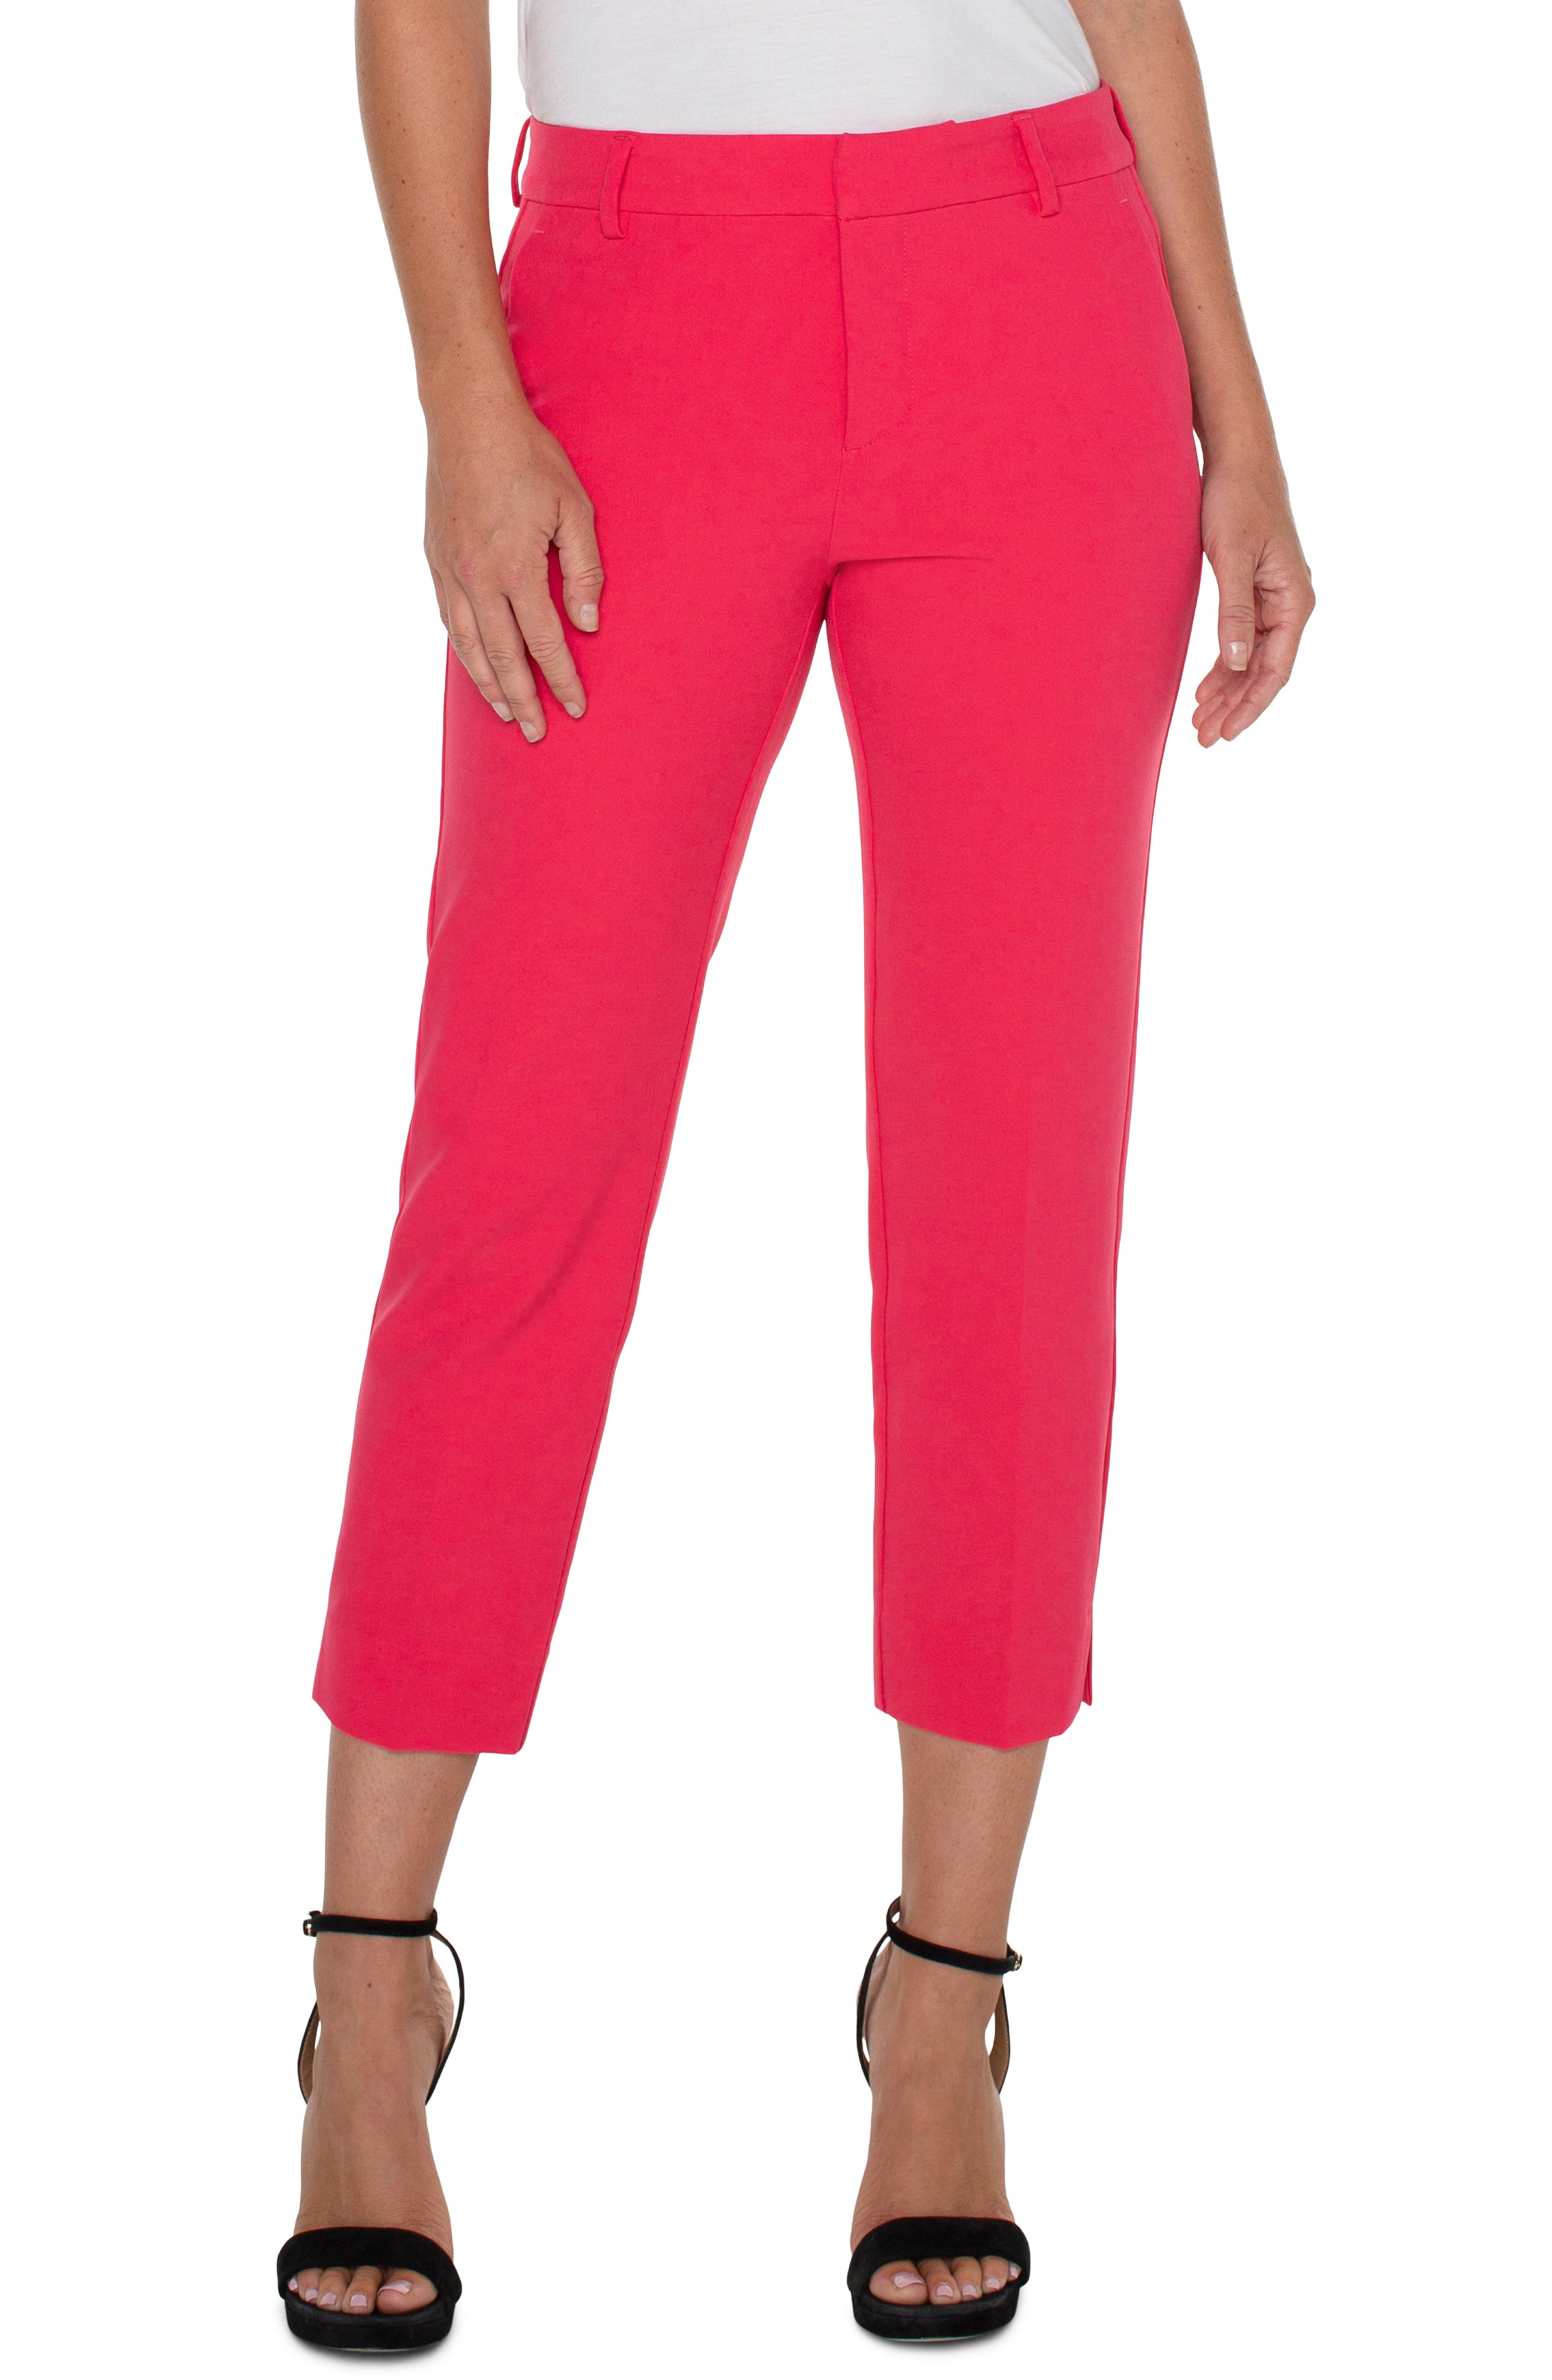 LVP Kelsey Trouser - Pink Punch Front View